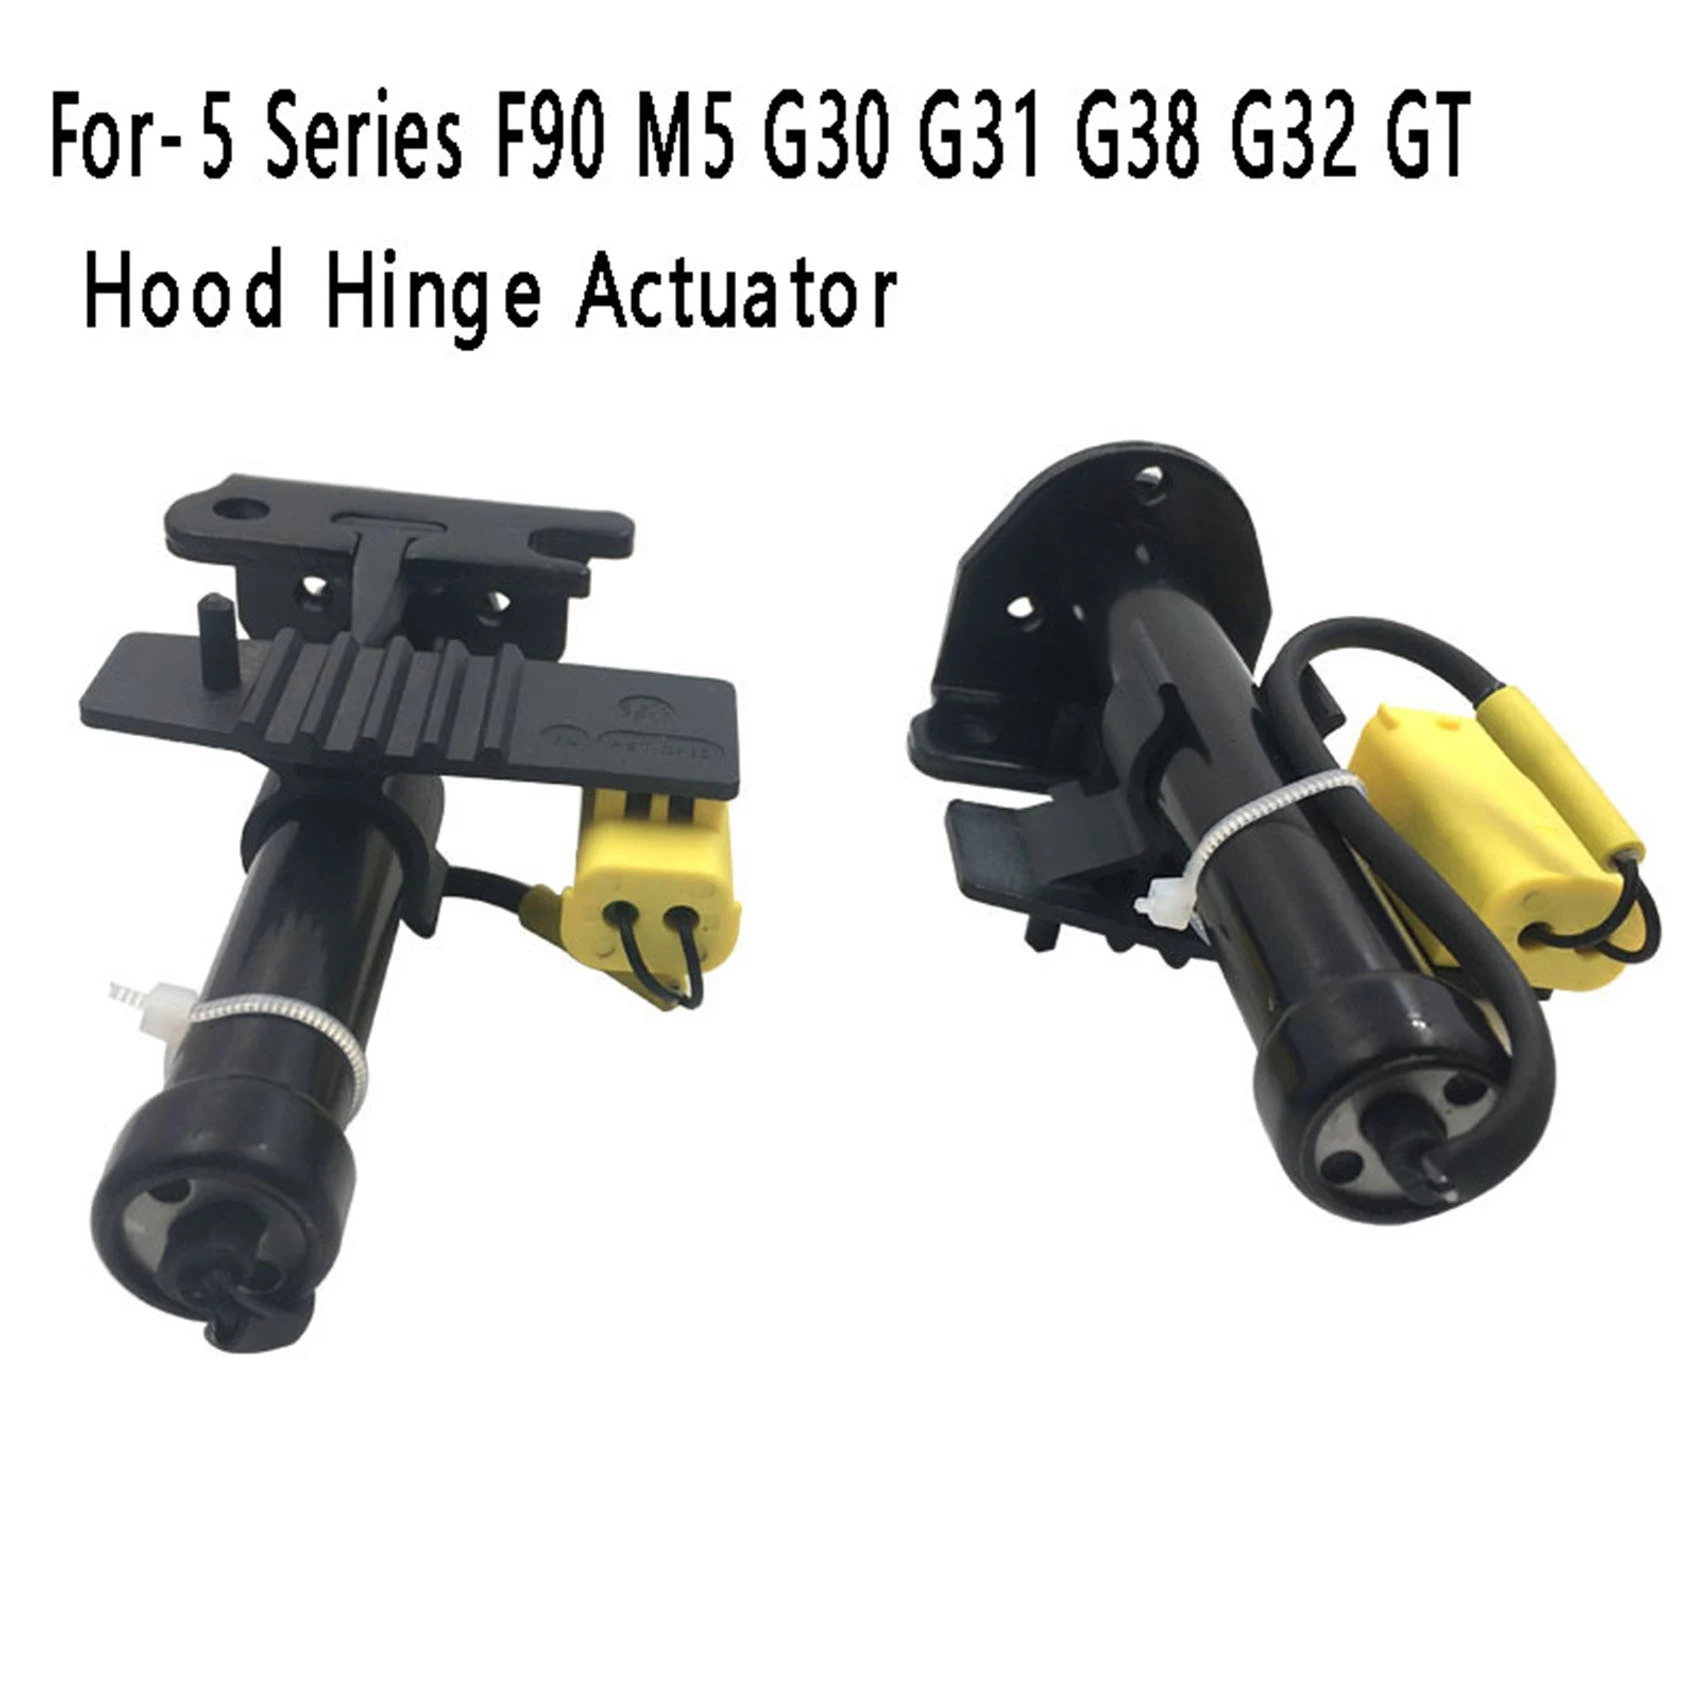 

1Pair Hood Hinge Actuator Hood Hydraulic Lever Trigger Hood Touch Sensor for-BMW 5 Series F90 M5 G30 G31 G38 G32 GT